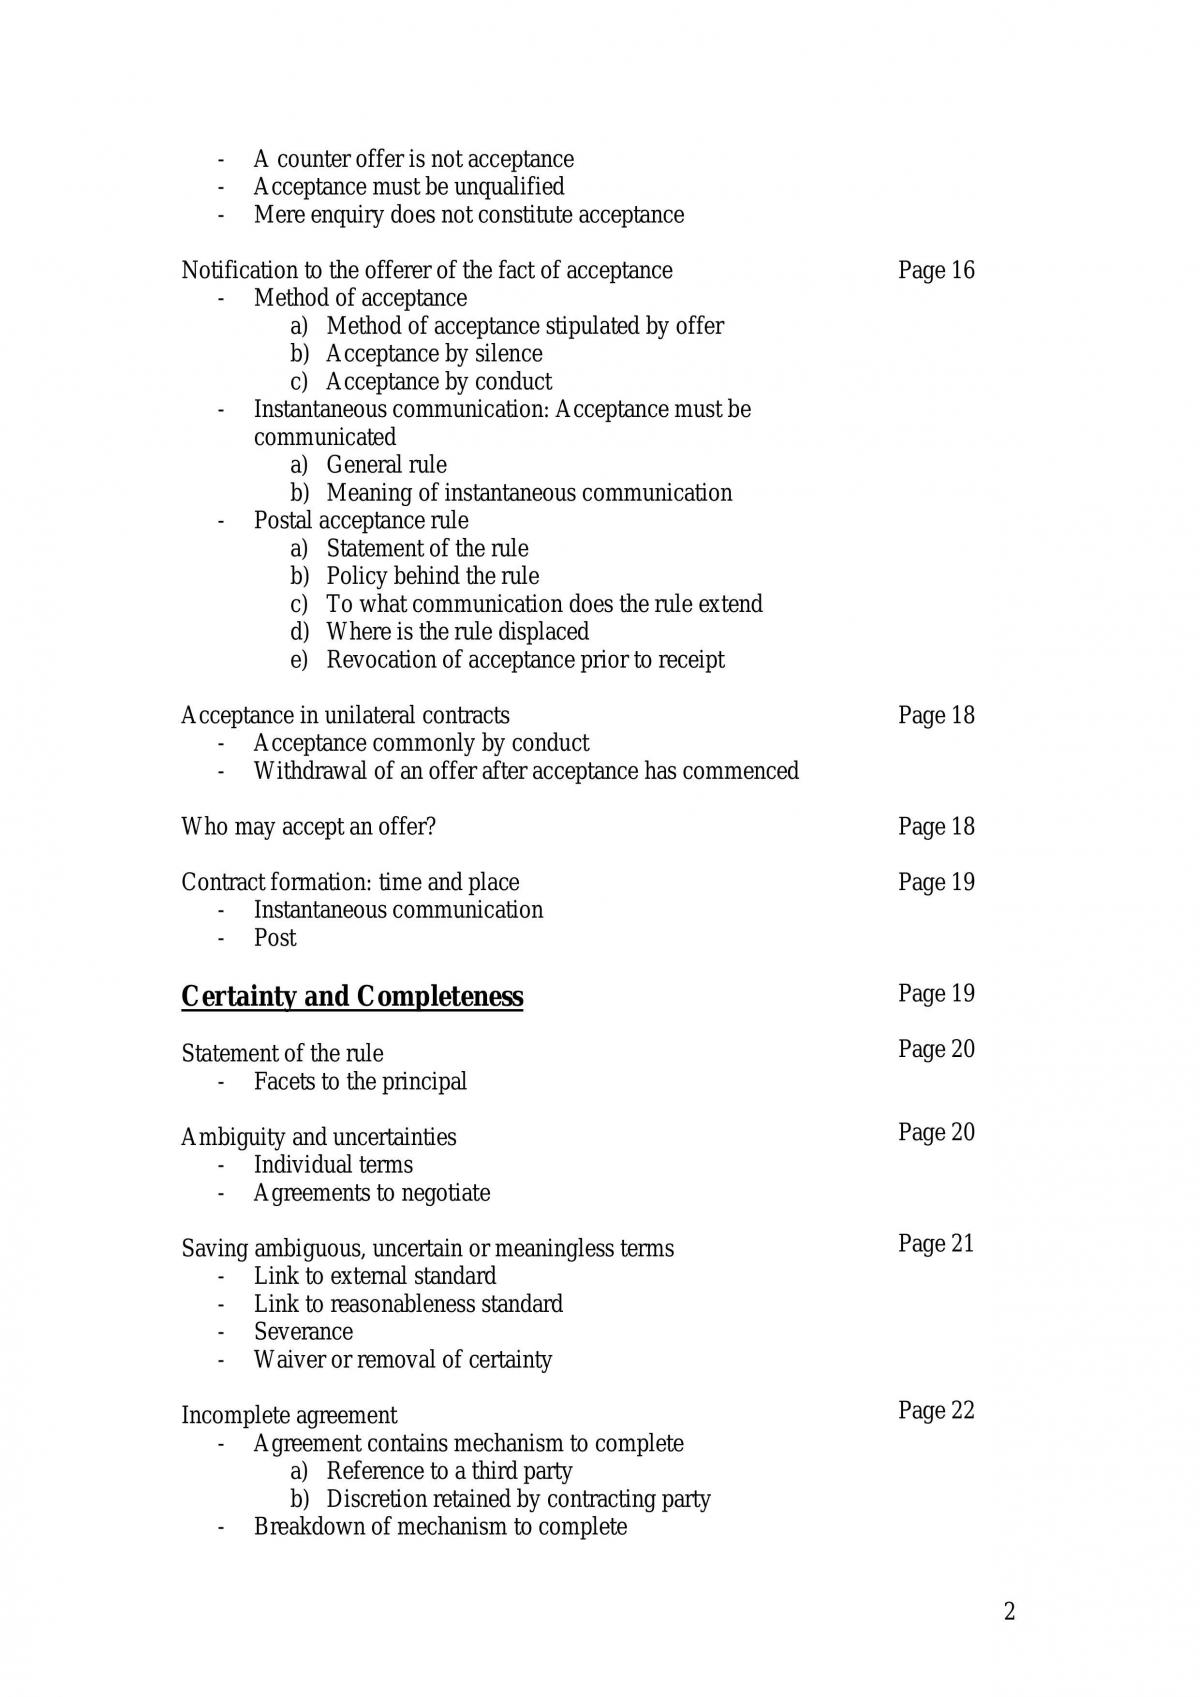 Complete Contracts Study Notes - Page 2